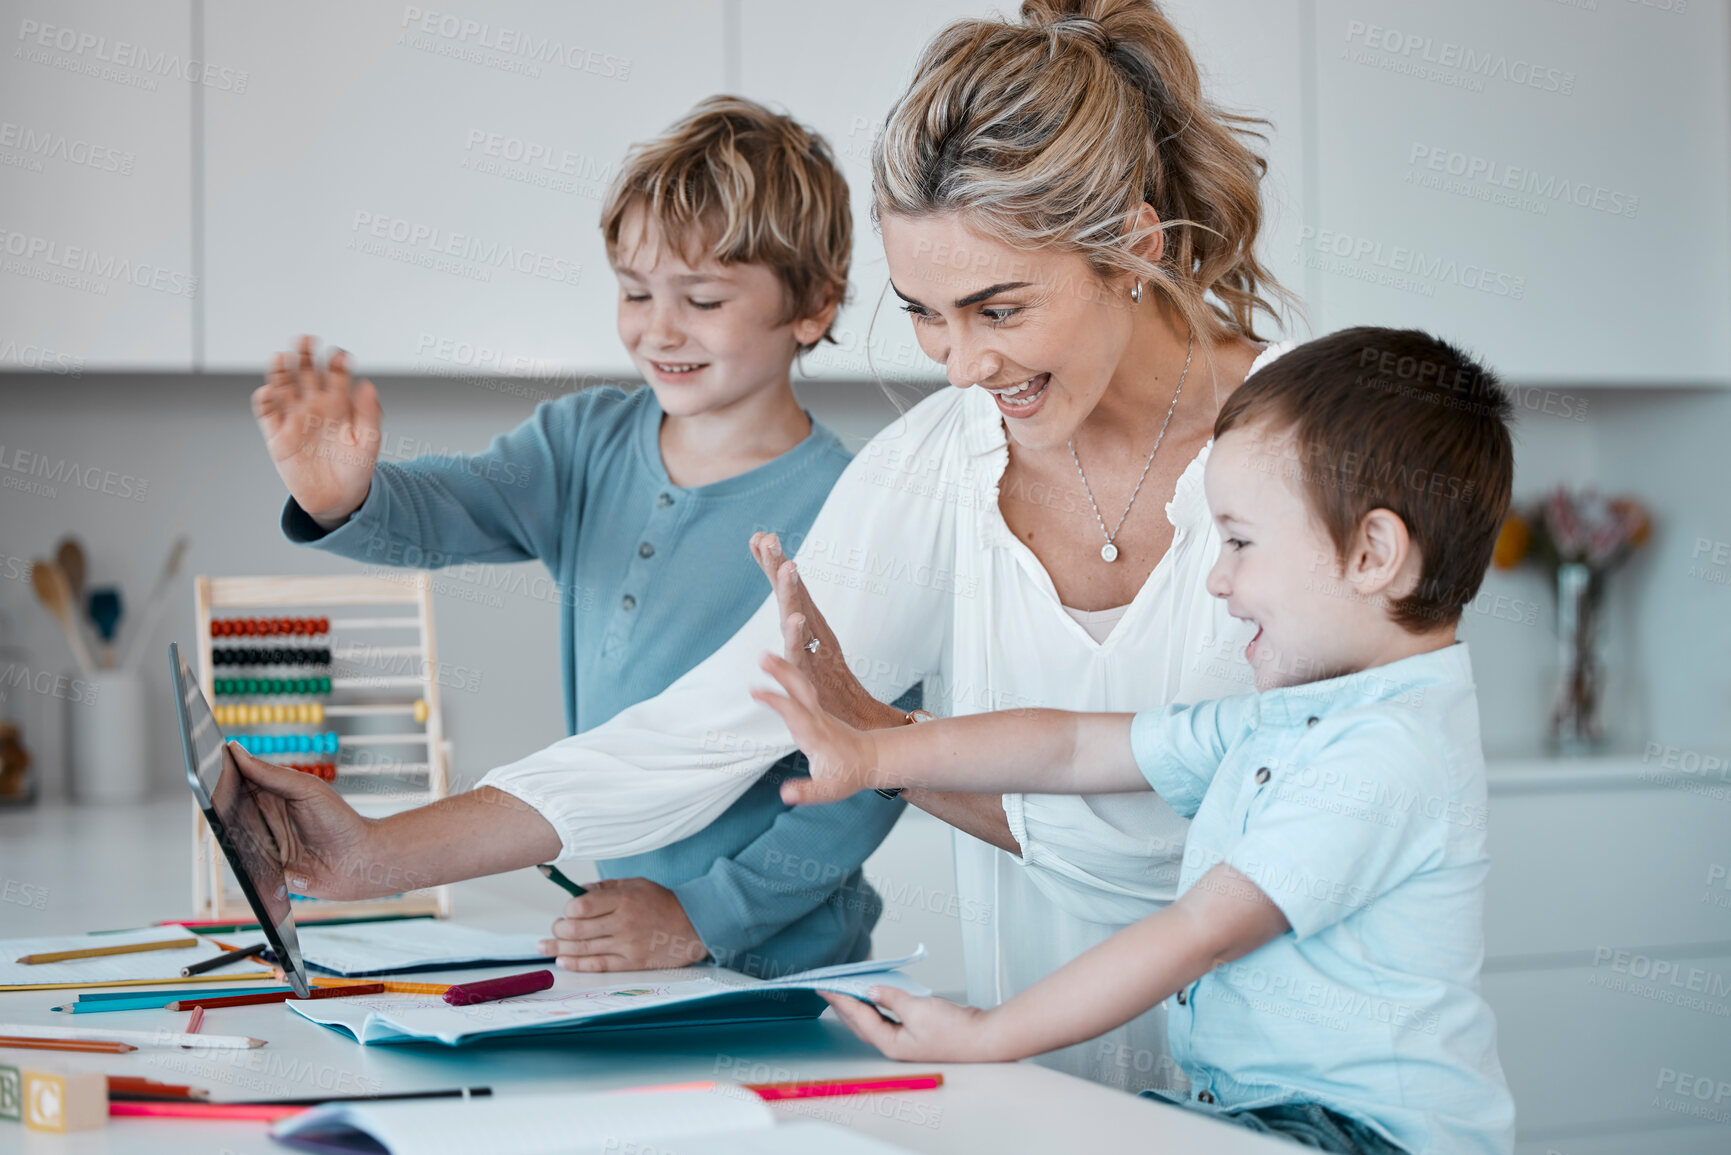 Buy stock photo Family on a distance learning video call, learning or teaching online. A happy mother and her little boy using a digital tablet for an online education. Parent helping with homework